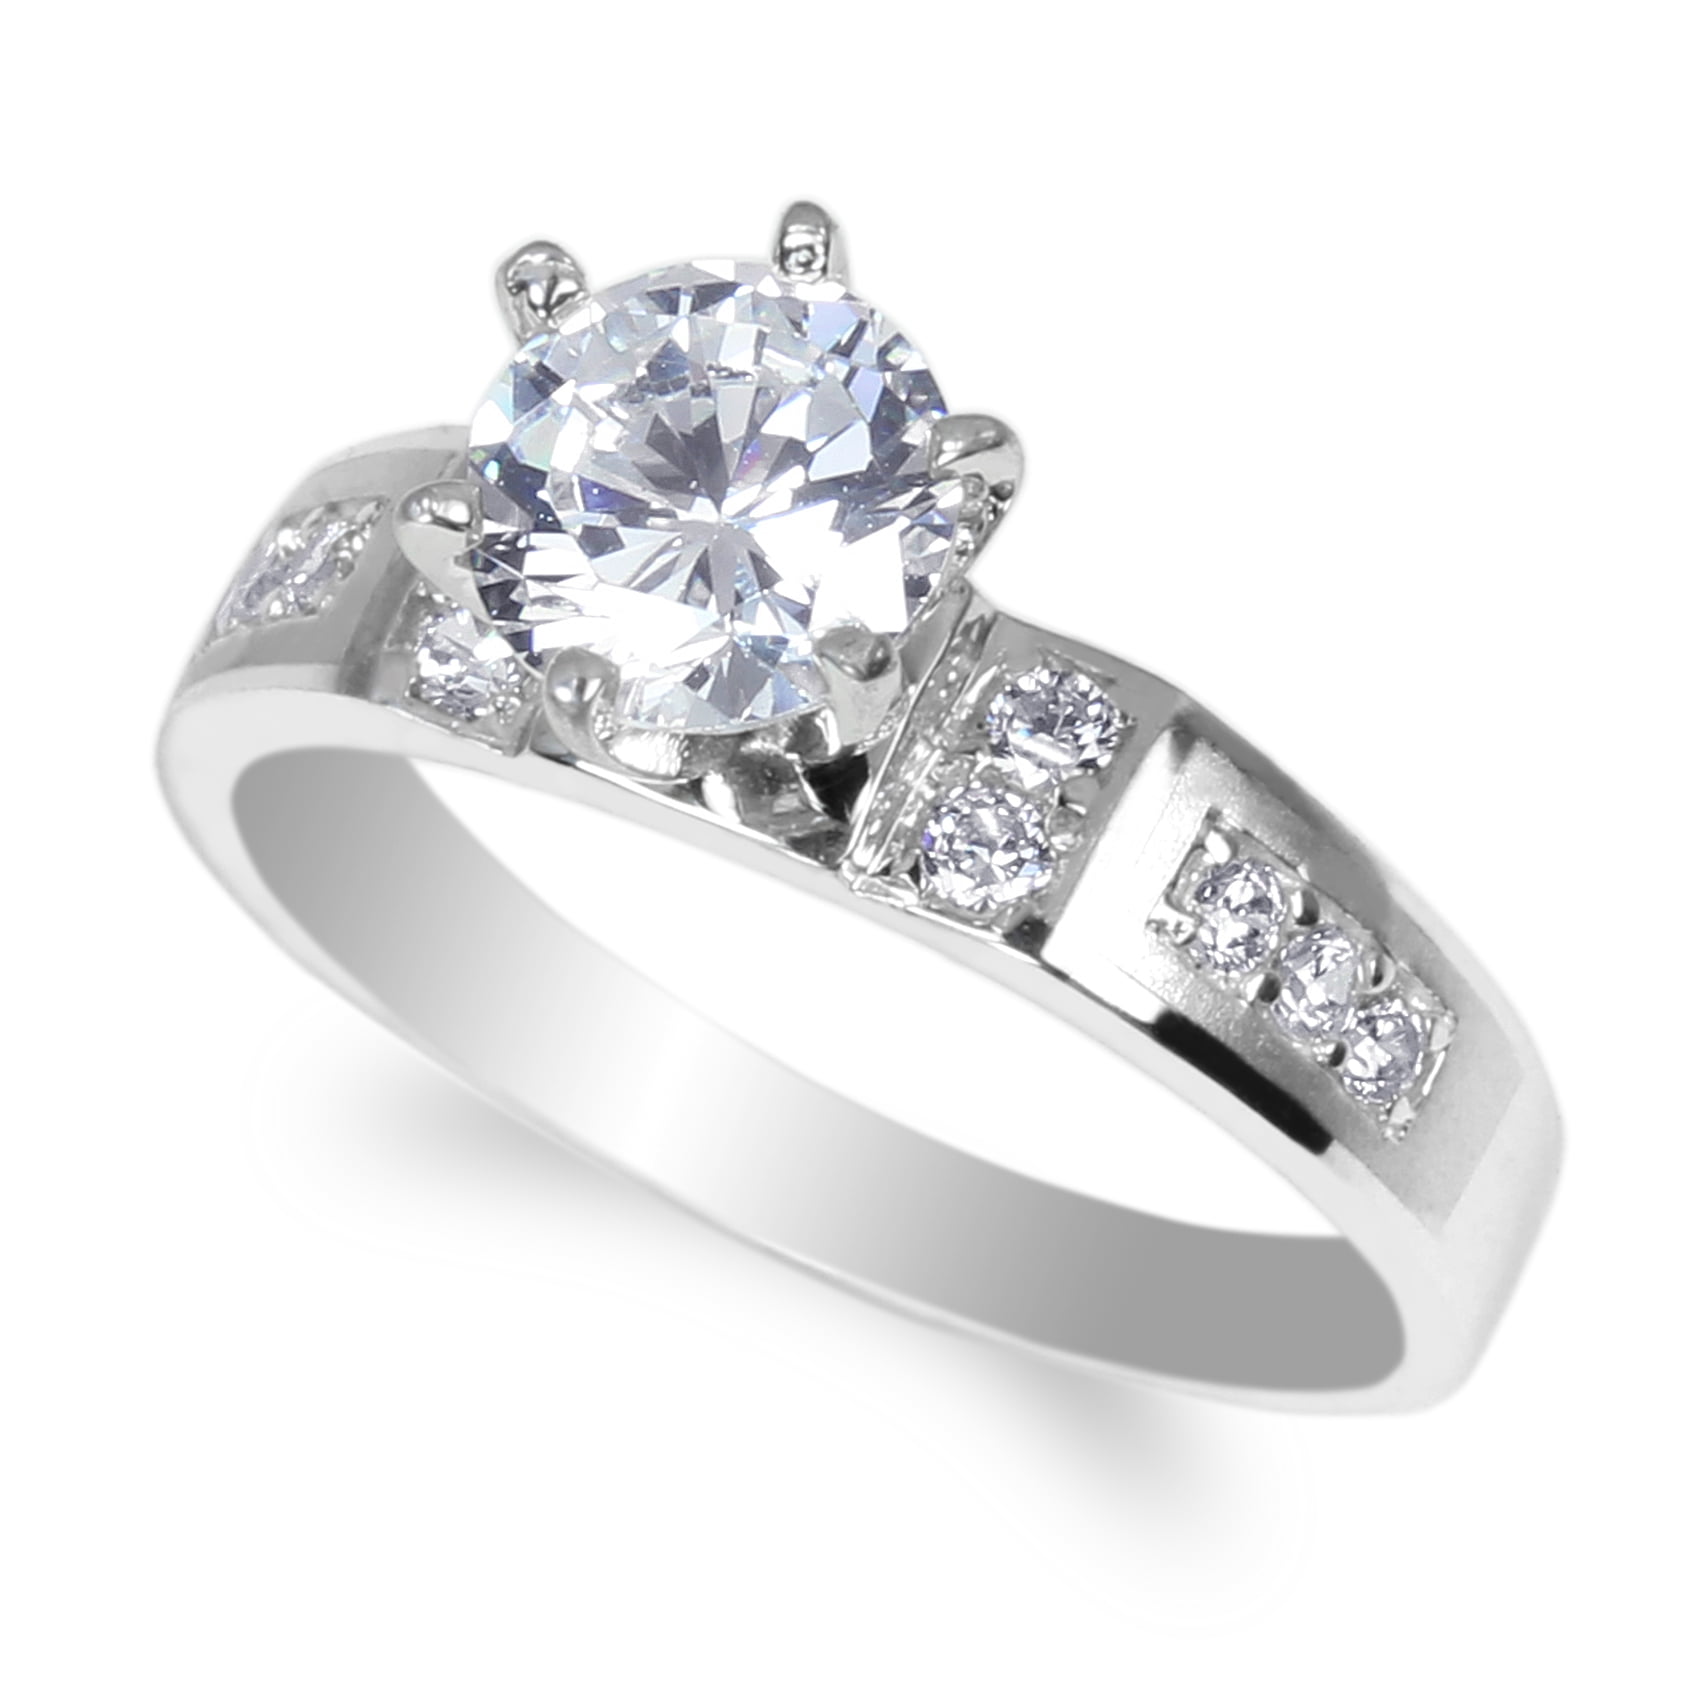 Ladies Sterling Silver White Gold Plated Solitaire Ring  1.0 ct Round CZ